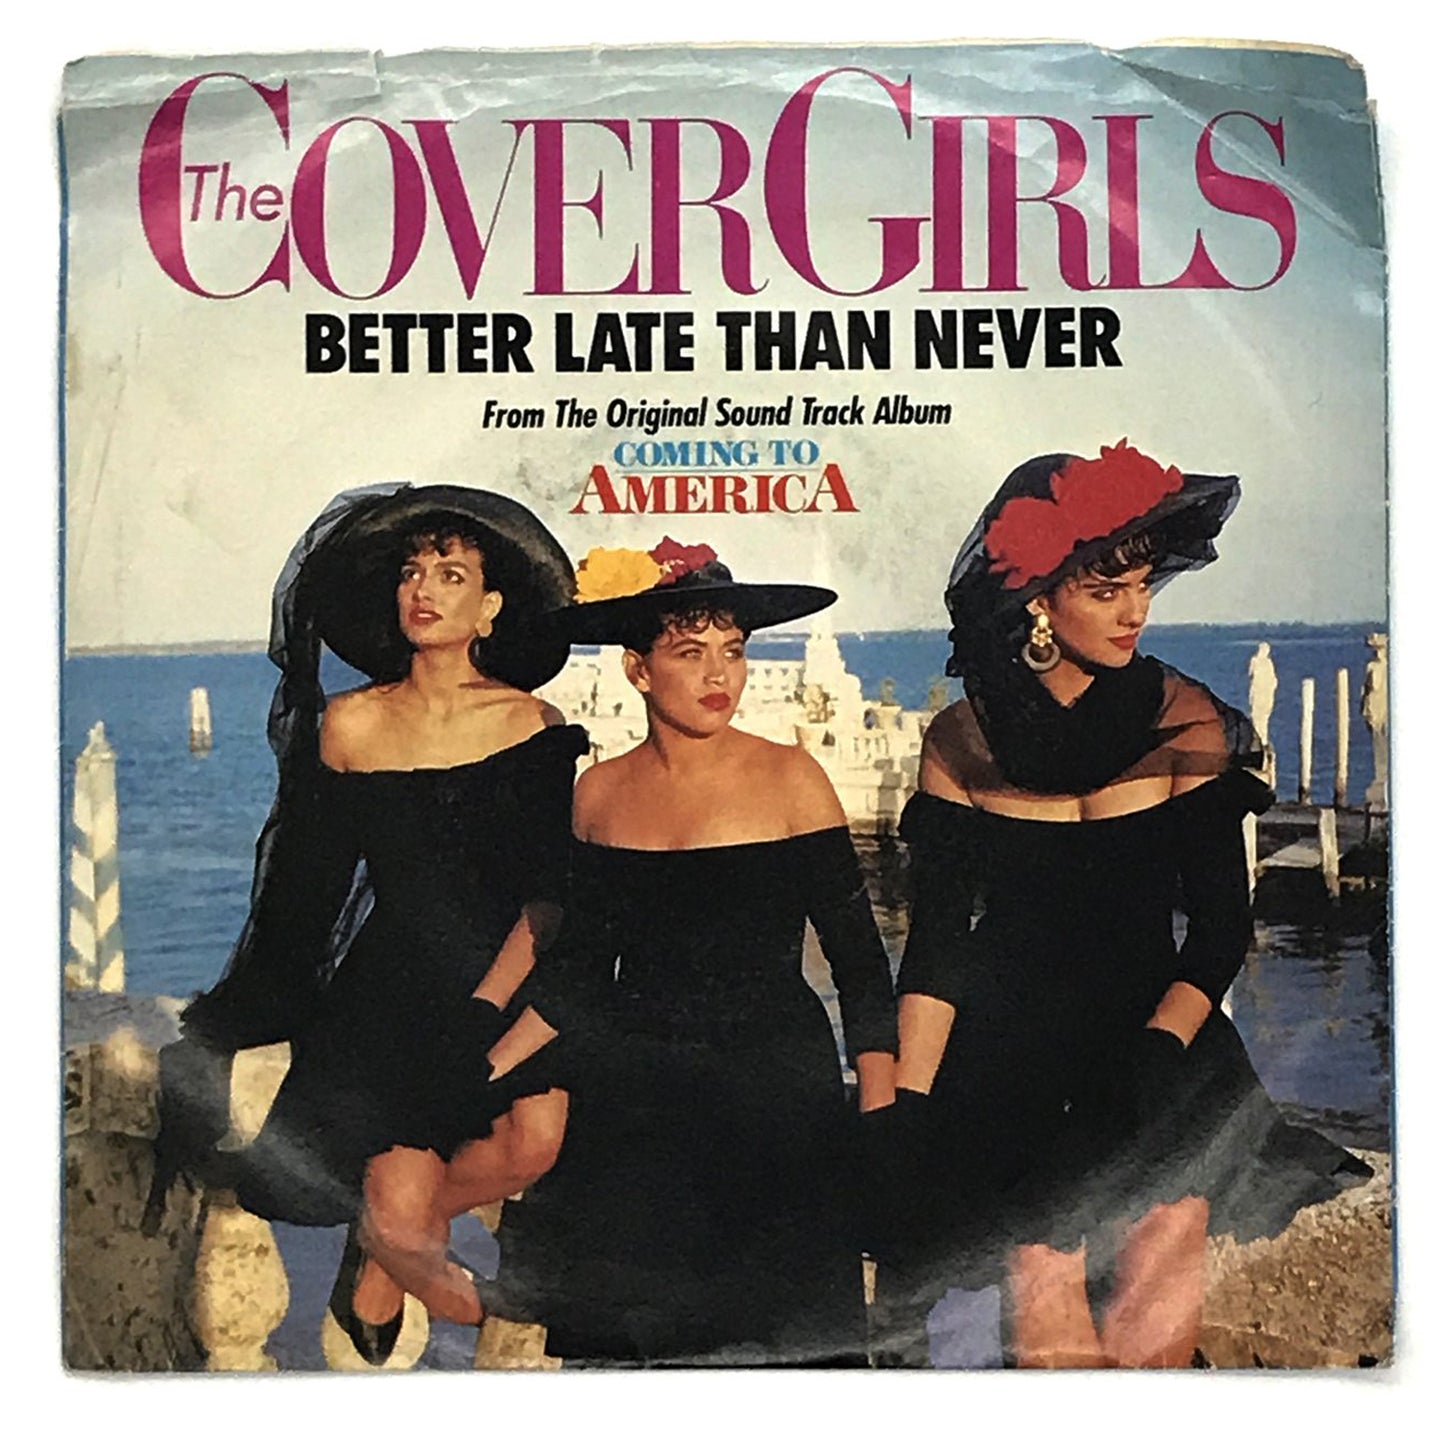 Cover Girls, The : BETTER LATE THAN NEVER/ BETTER LATE THAN NEVER (DUB VERSION)